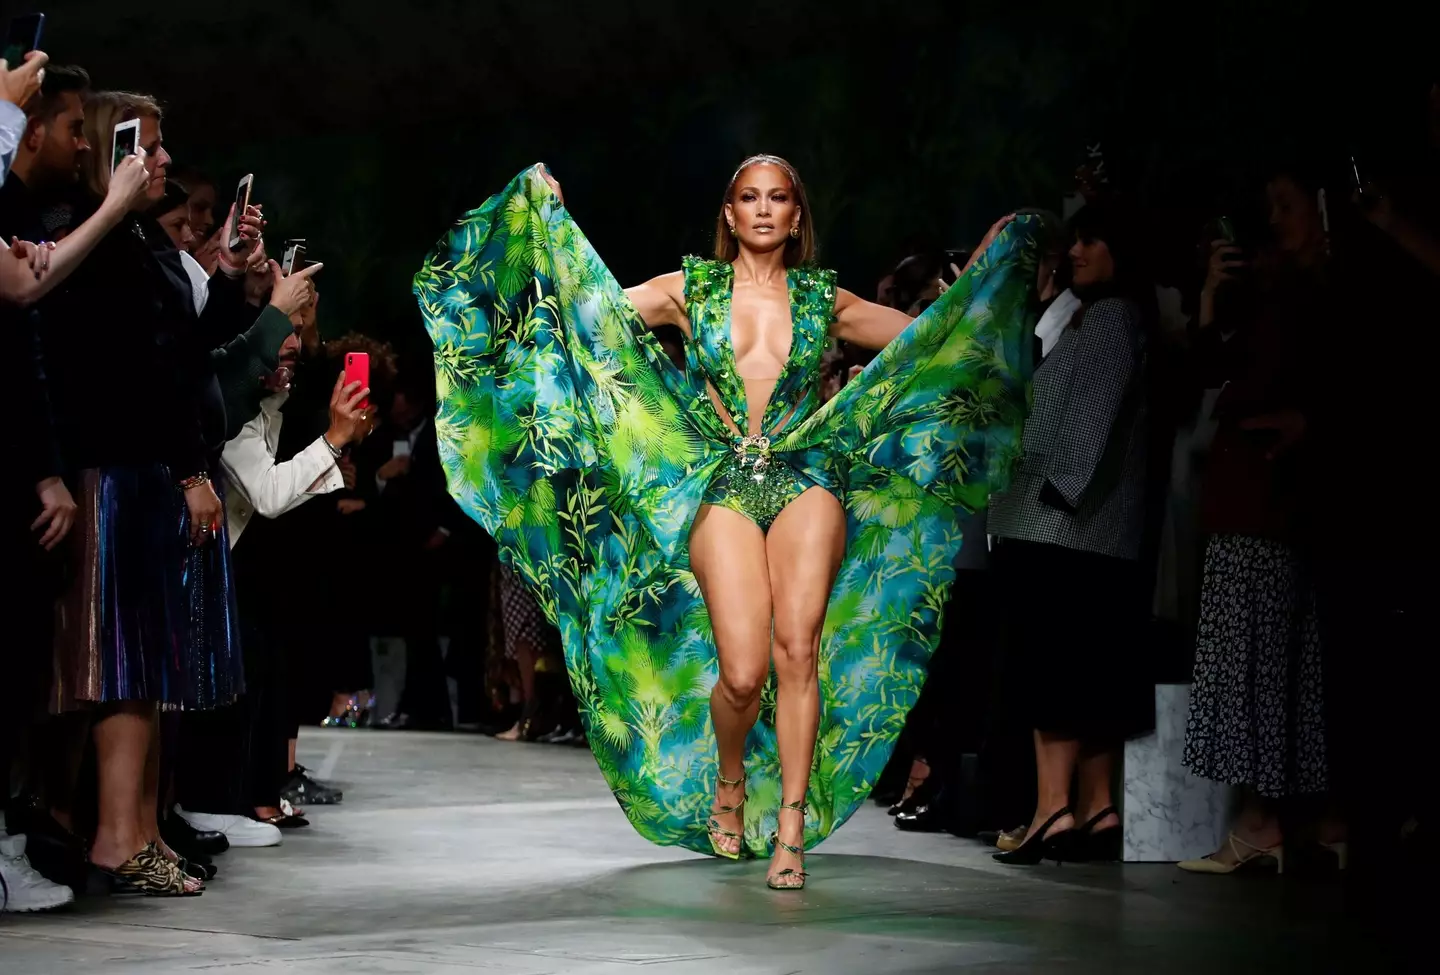 Jennifer Lopez has worn a few versions of the iconic green Versace dress throughout the years.